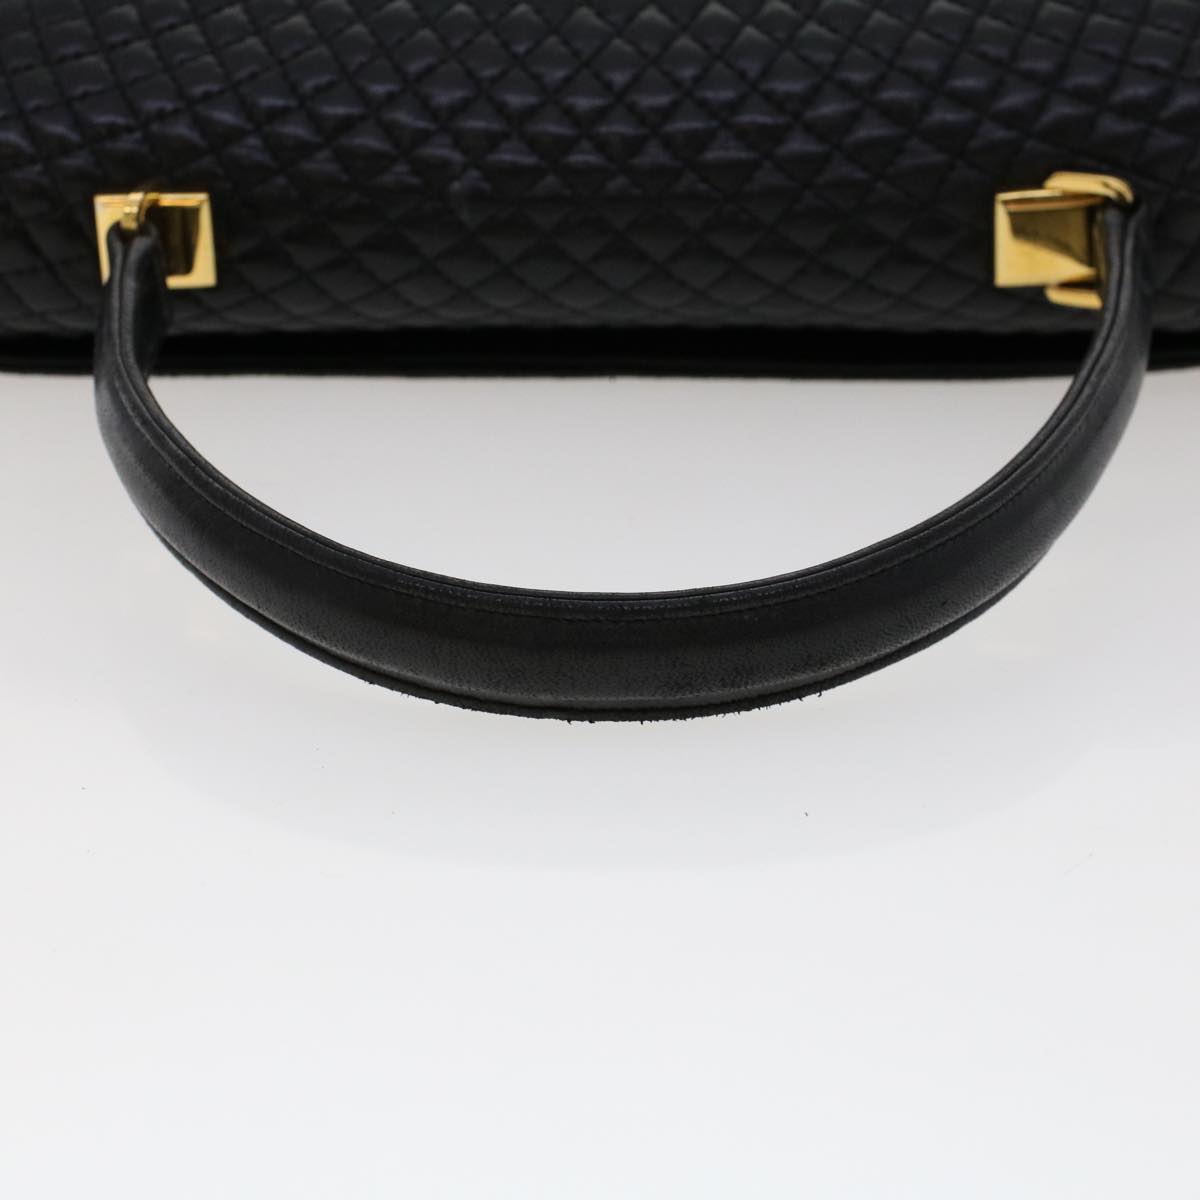 BALLY Quilted Hand Bag Leather Black Auth 45898